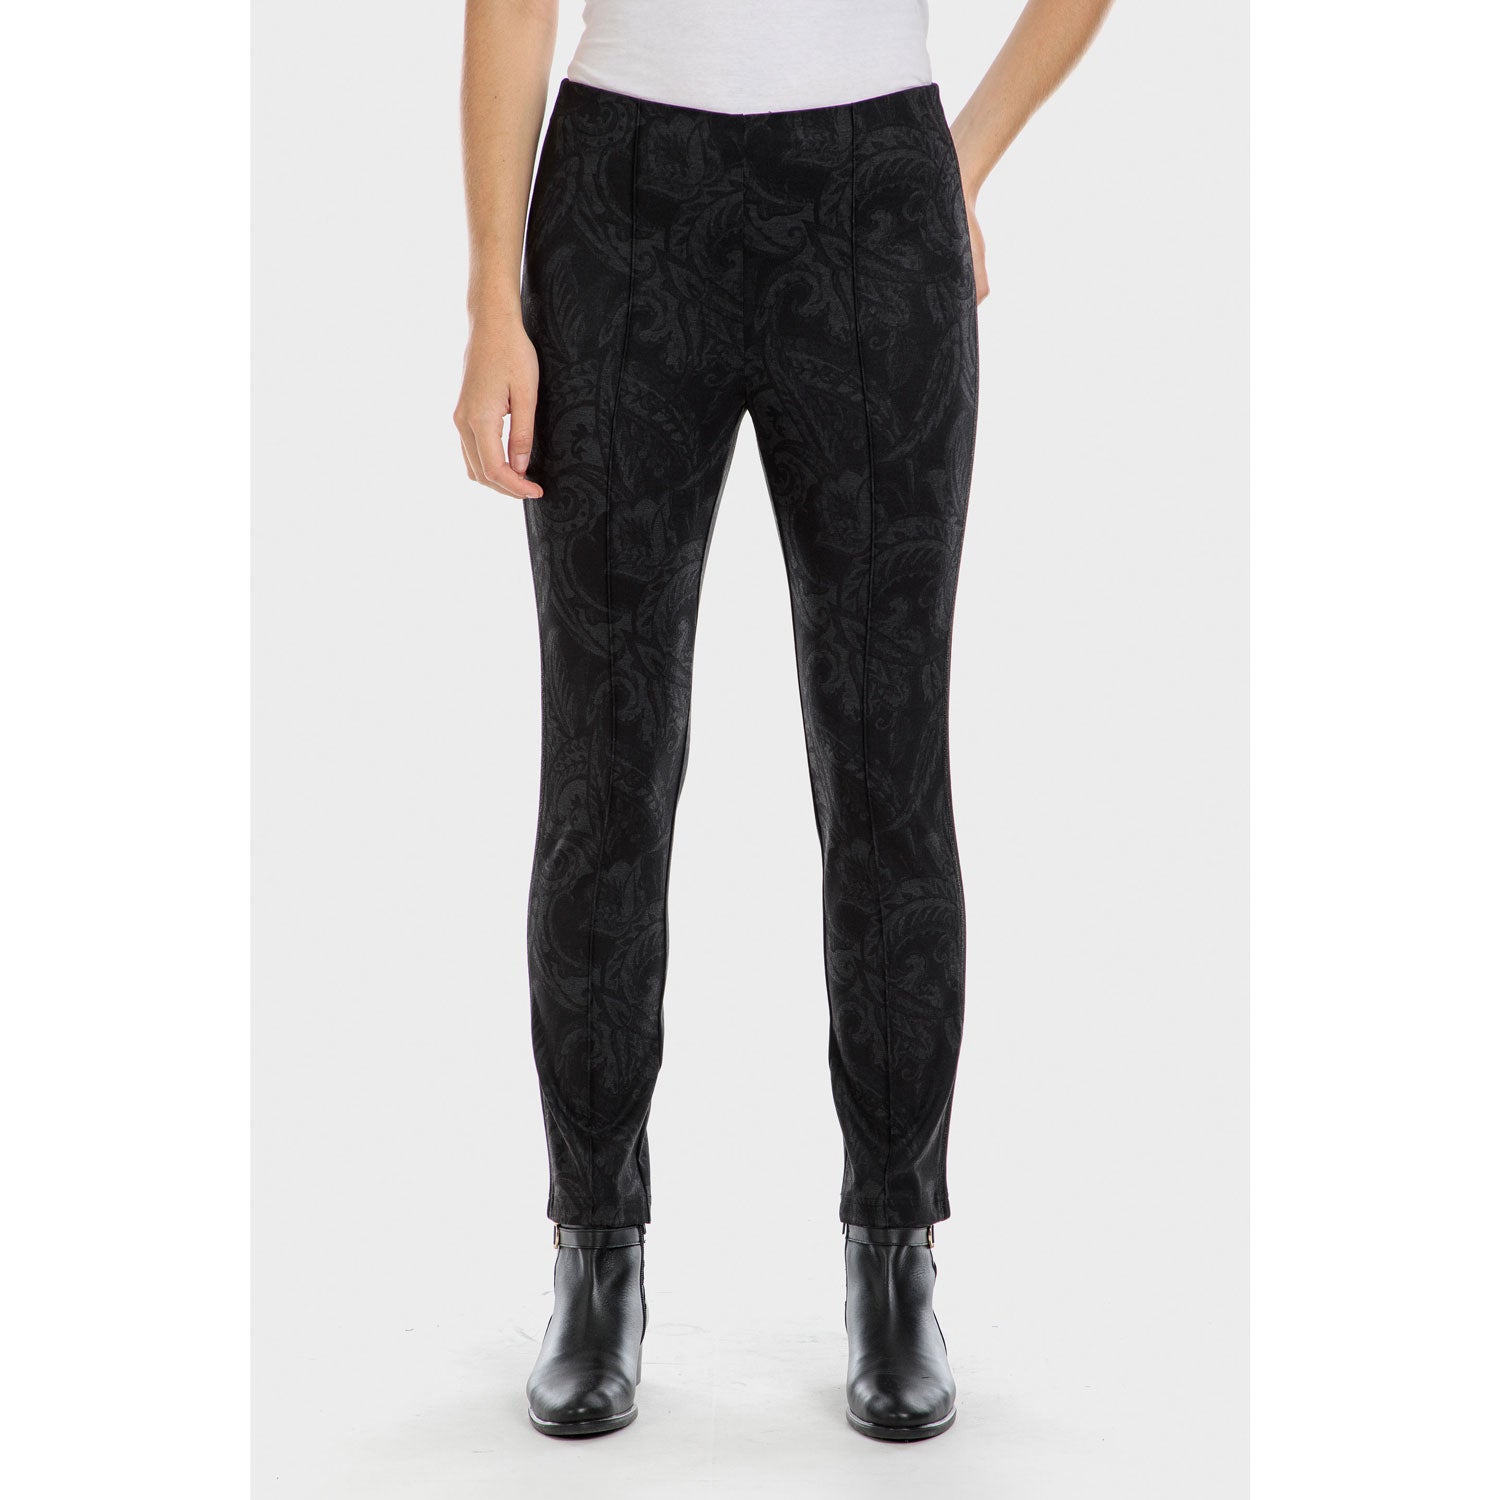 Punt Roma Fantasy Side Stripe Trousers - Black 1 Shaws Department Stores